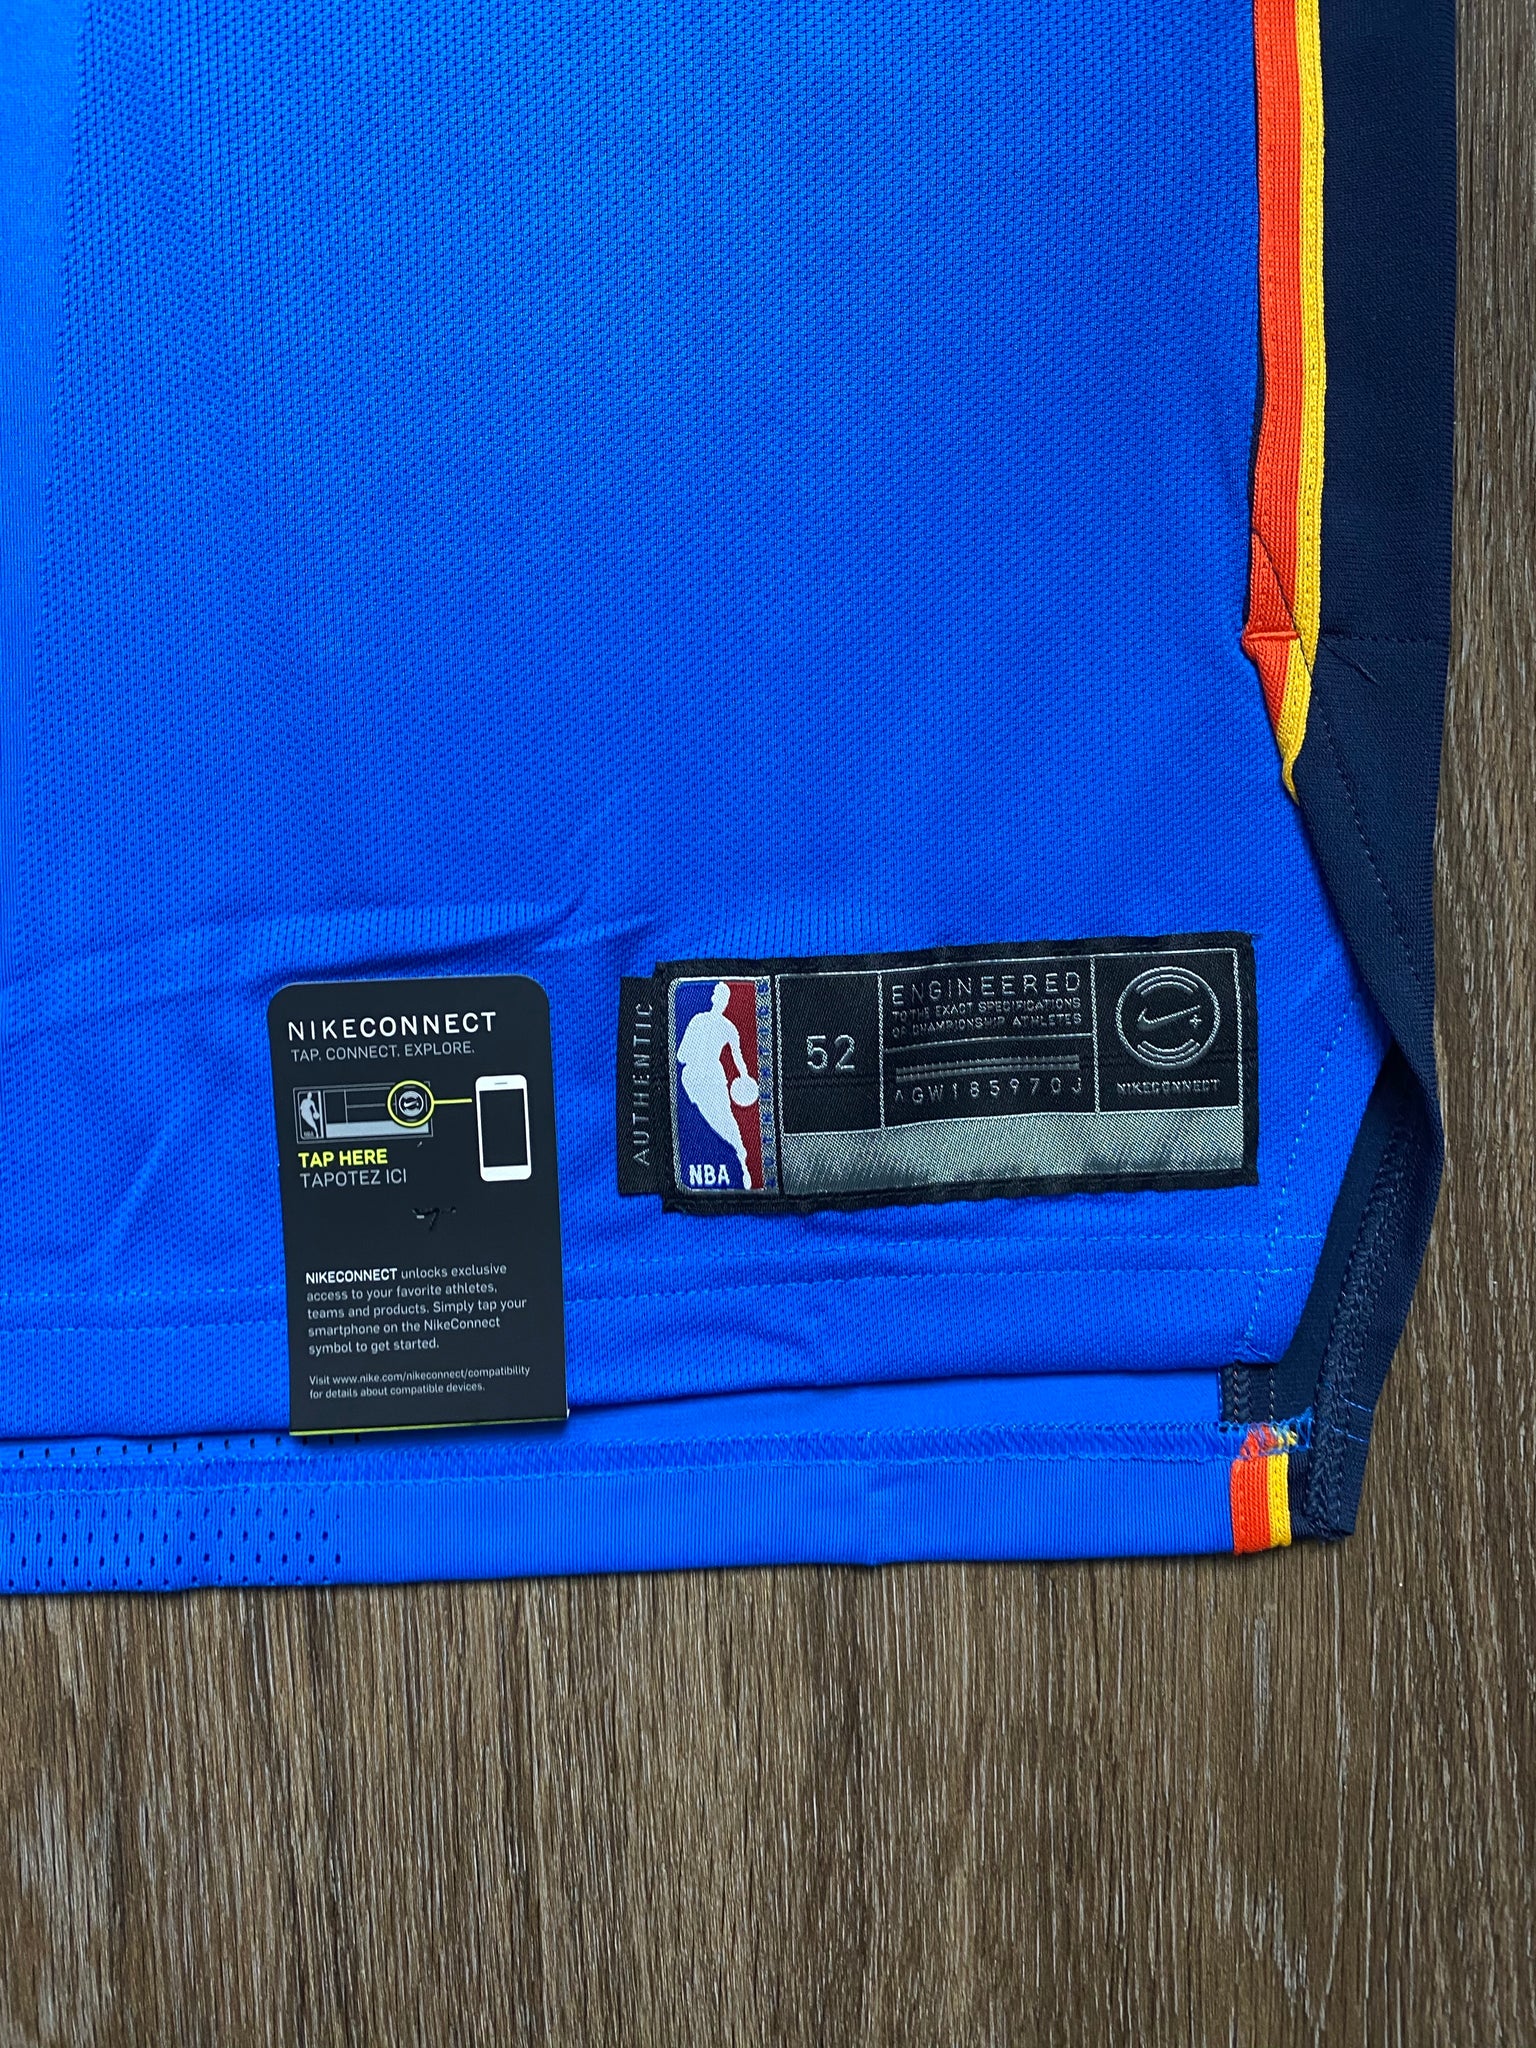 Oklahoma City Russel Westbrook 0 Home Jersey